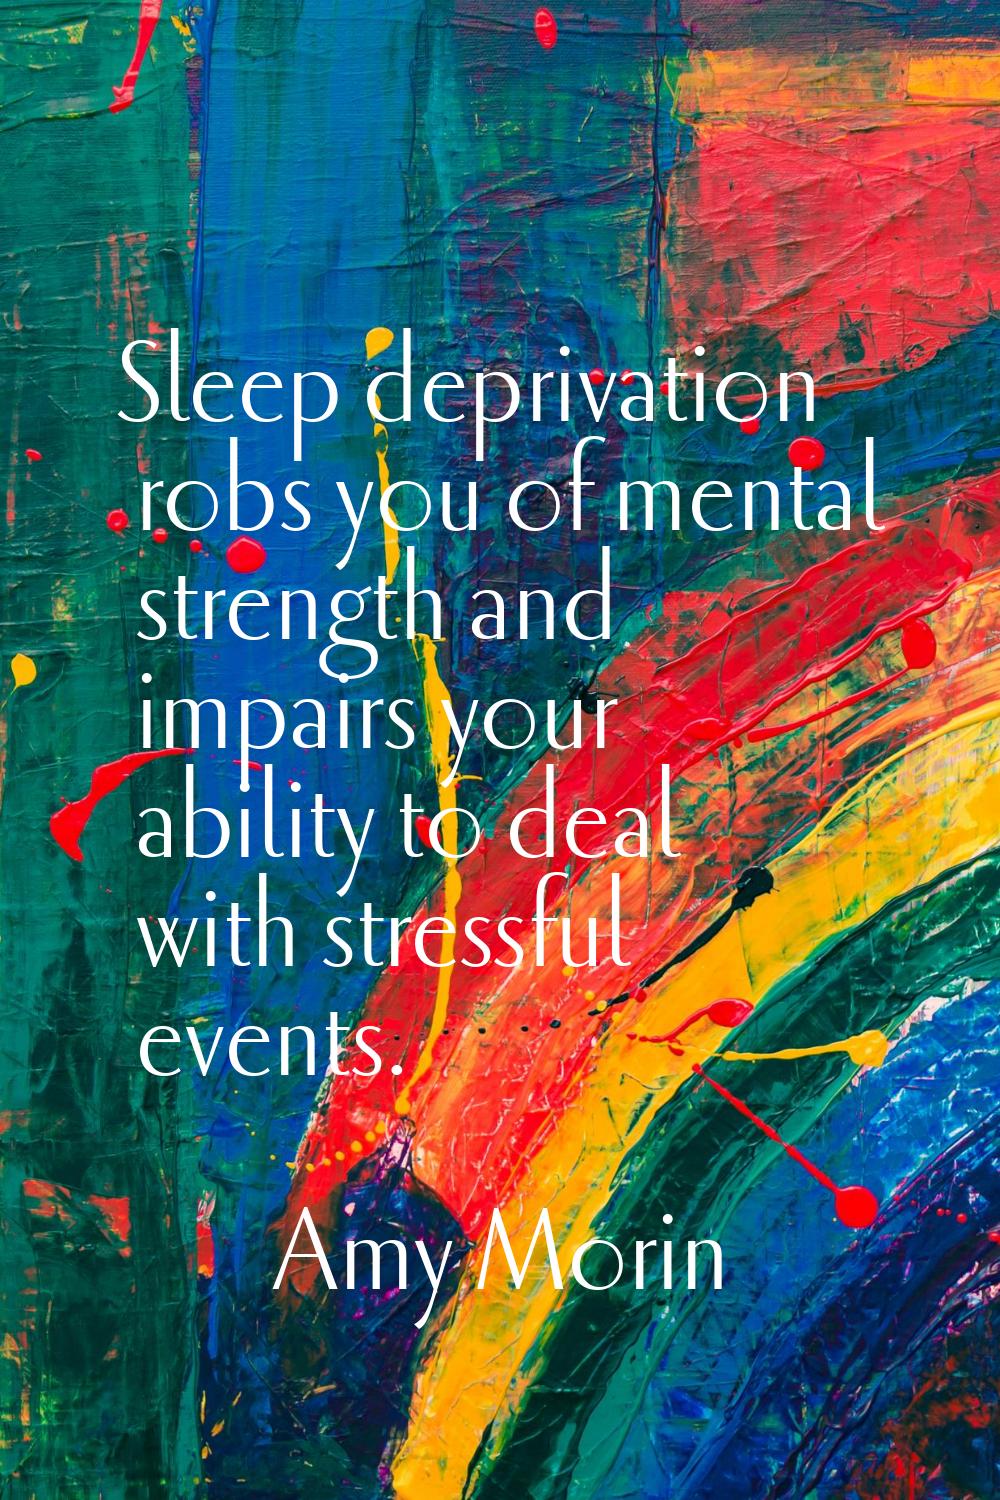 Sleep deprivation robs you of mental strength and impairs your ability to deal with stressful event